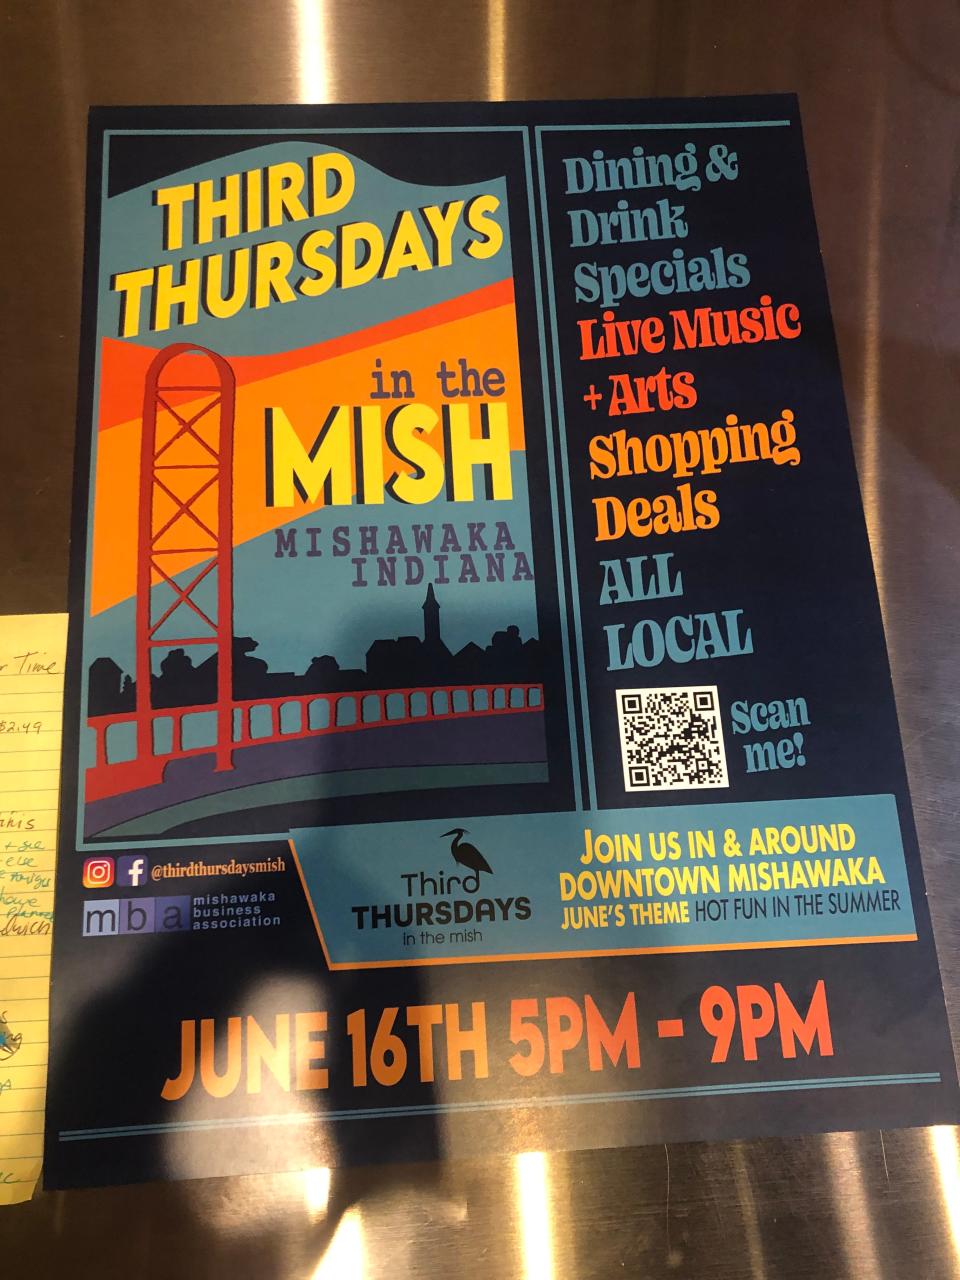 Third Thursdays in the Mish will host its first event on June 16 from 5 to 9 p.m.